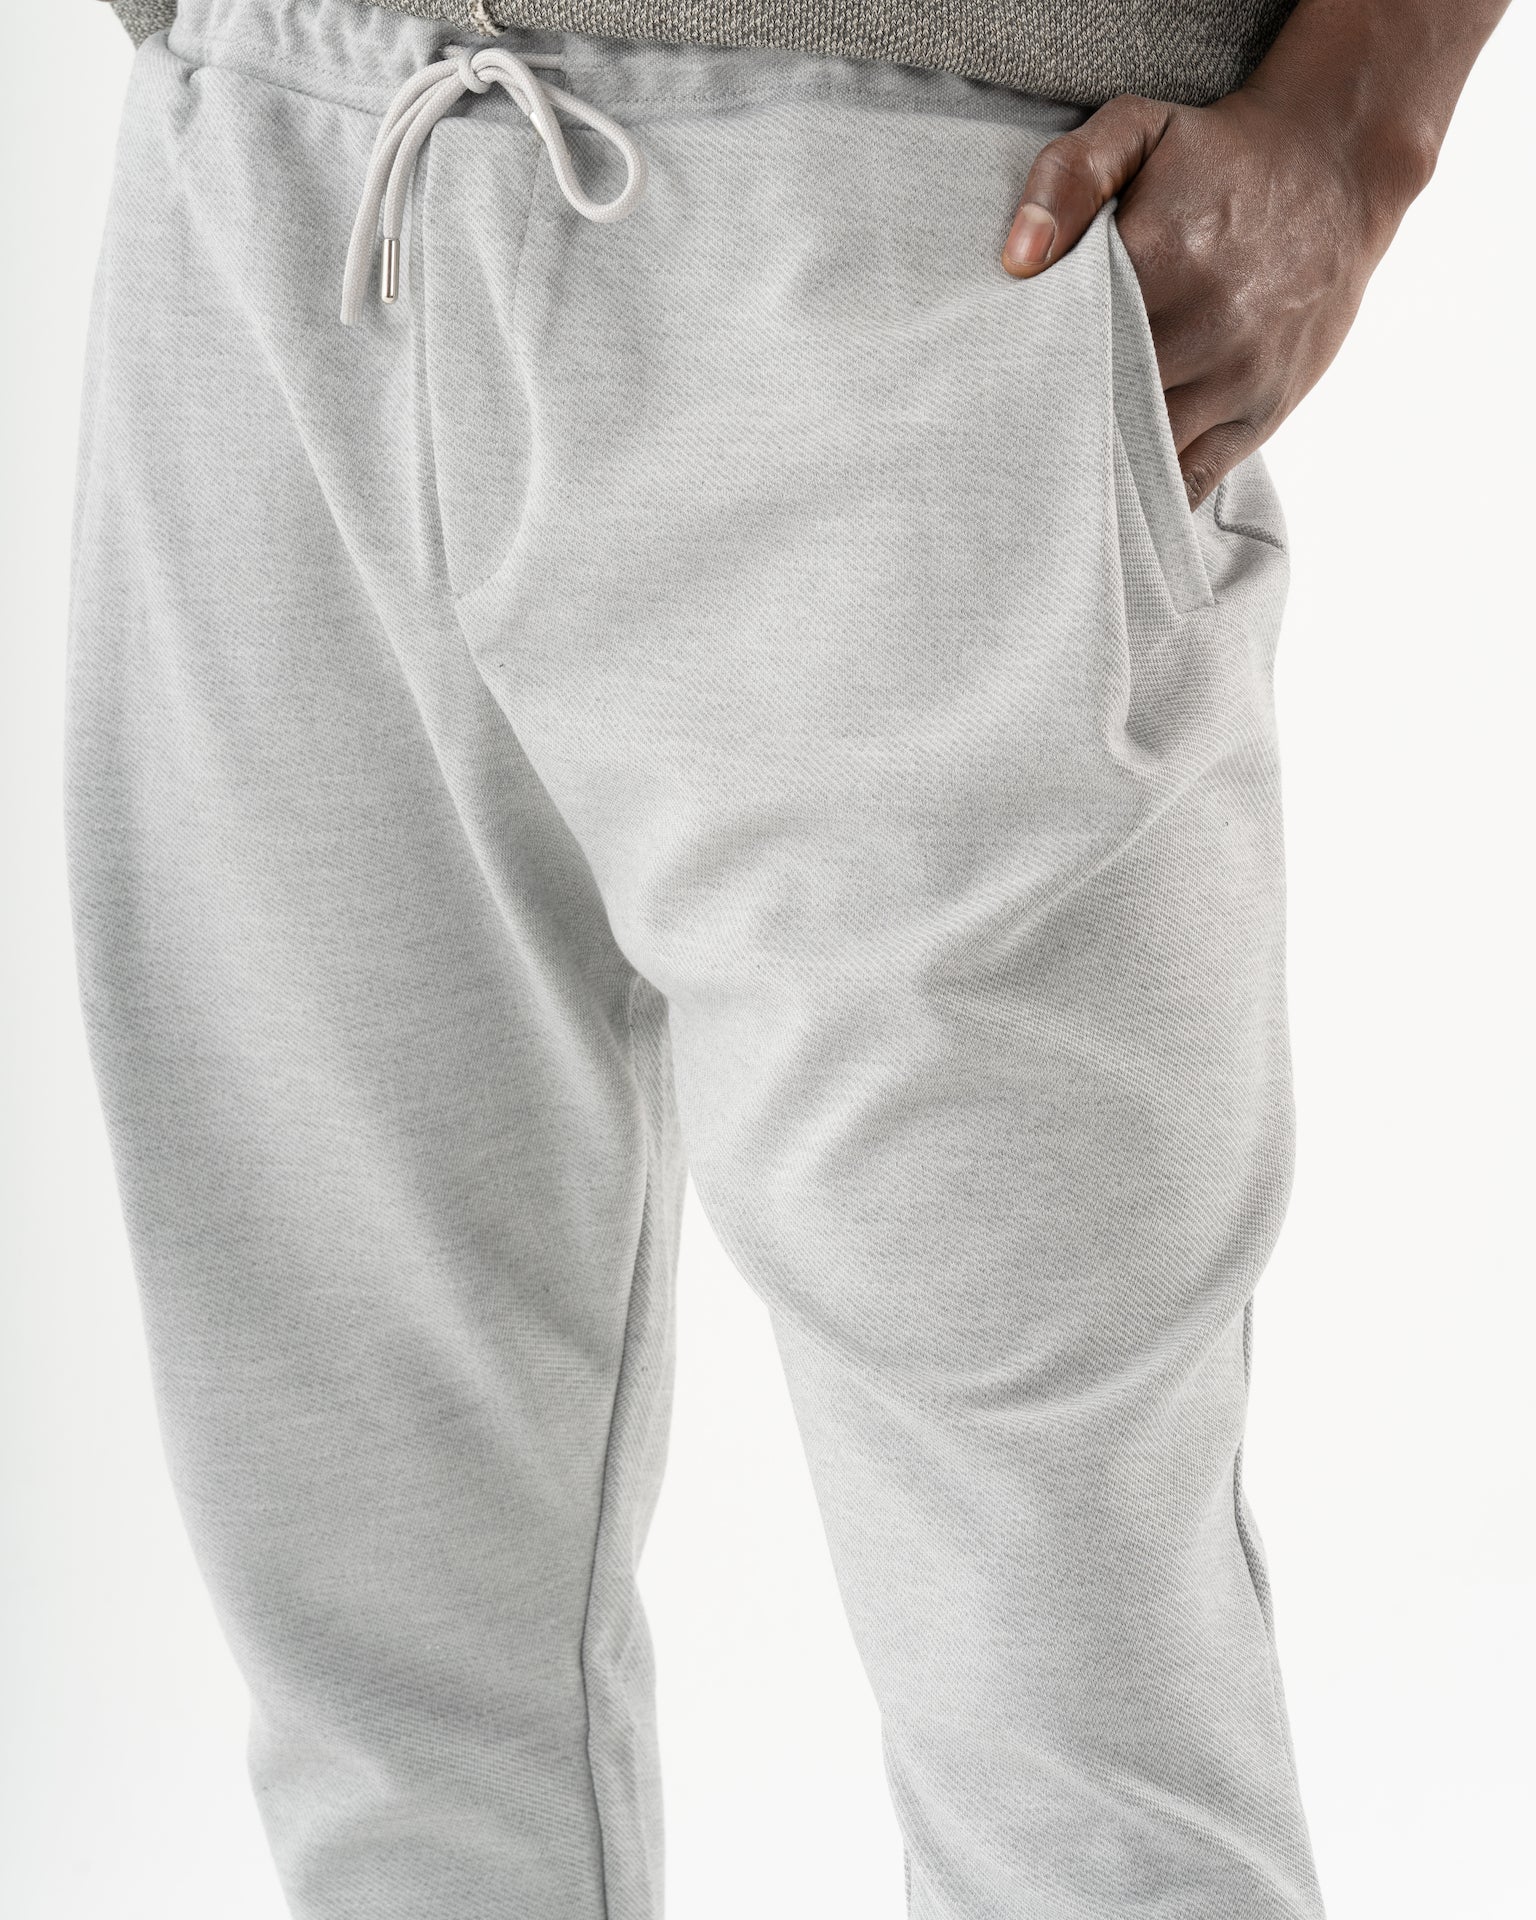 A man wearing SERENE JOGGERS, ideal for everyday wear or as joggers.